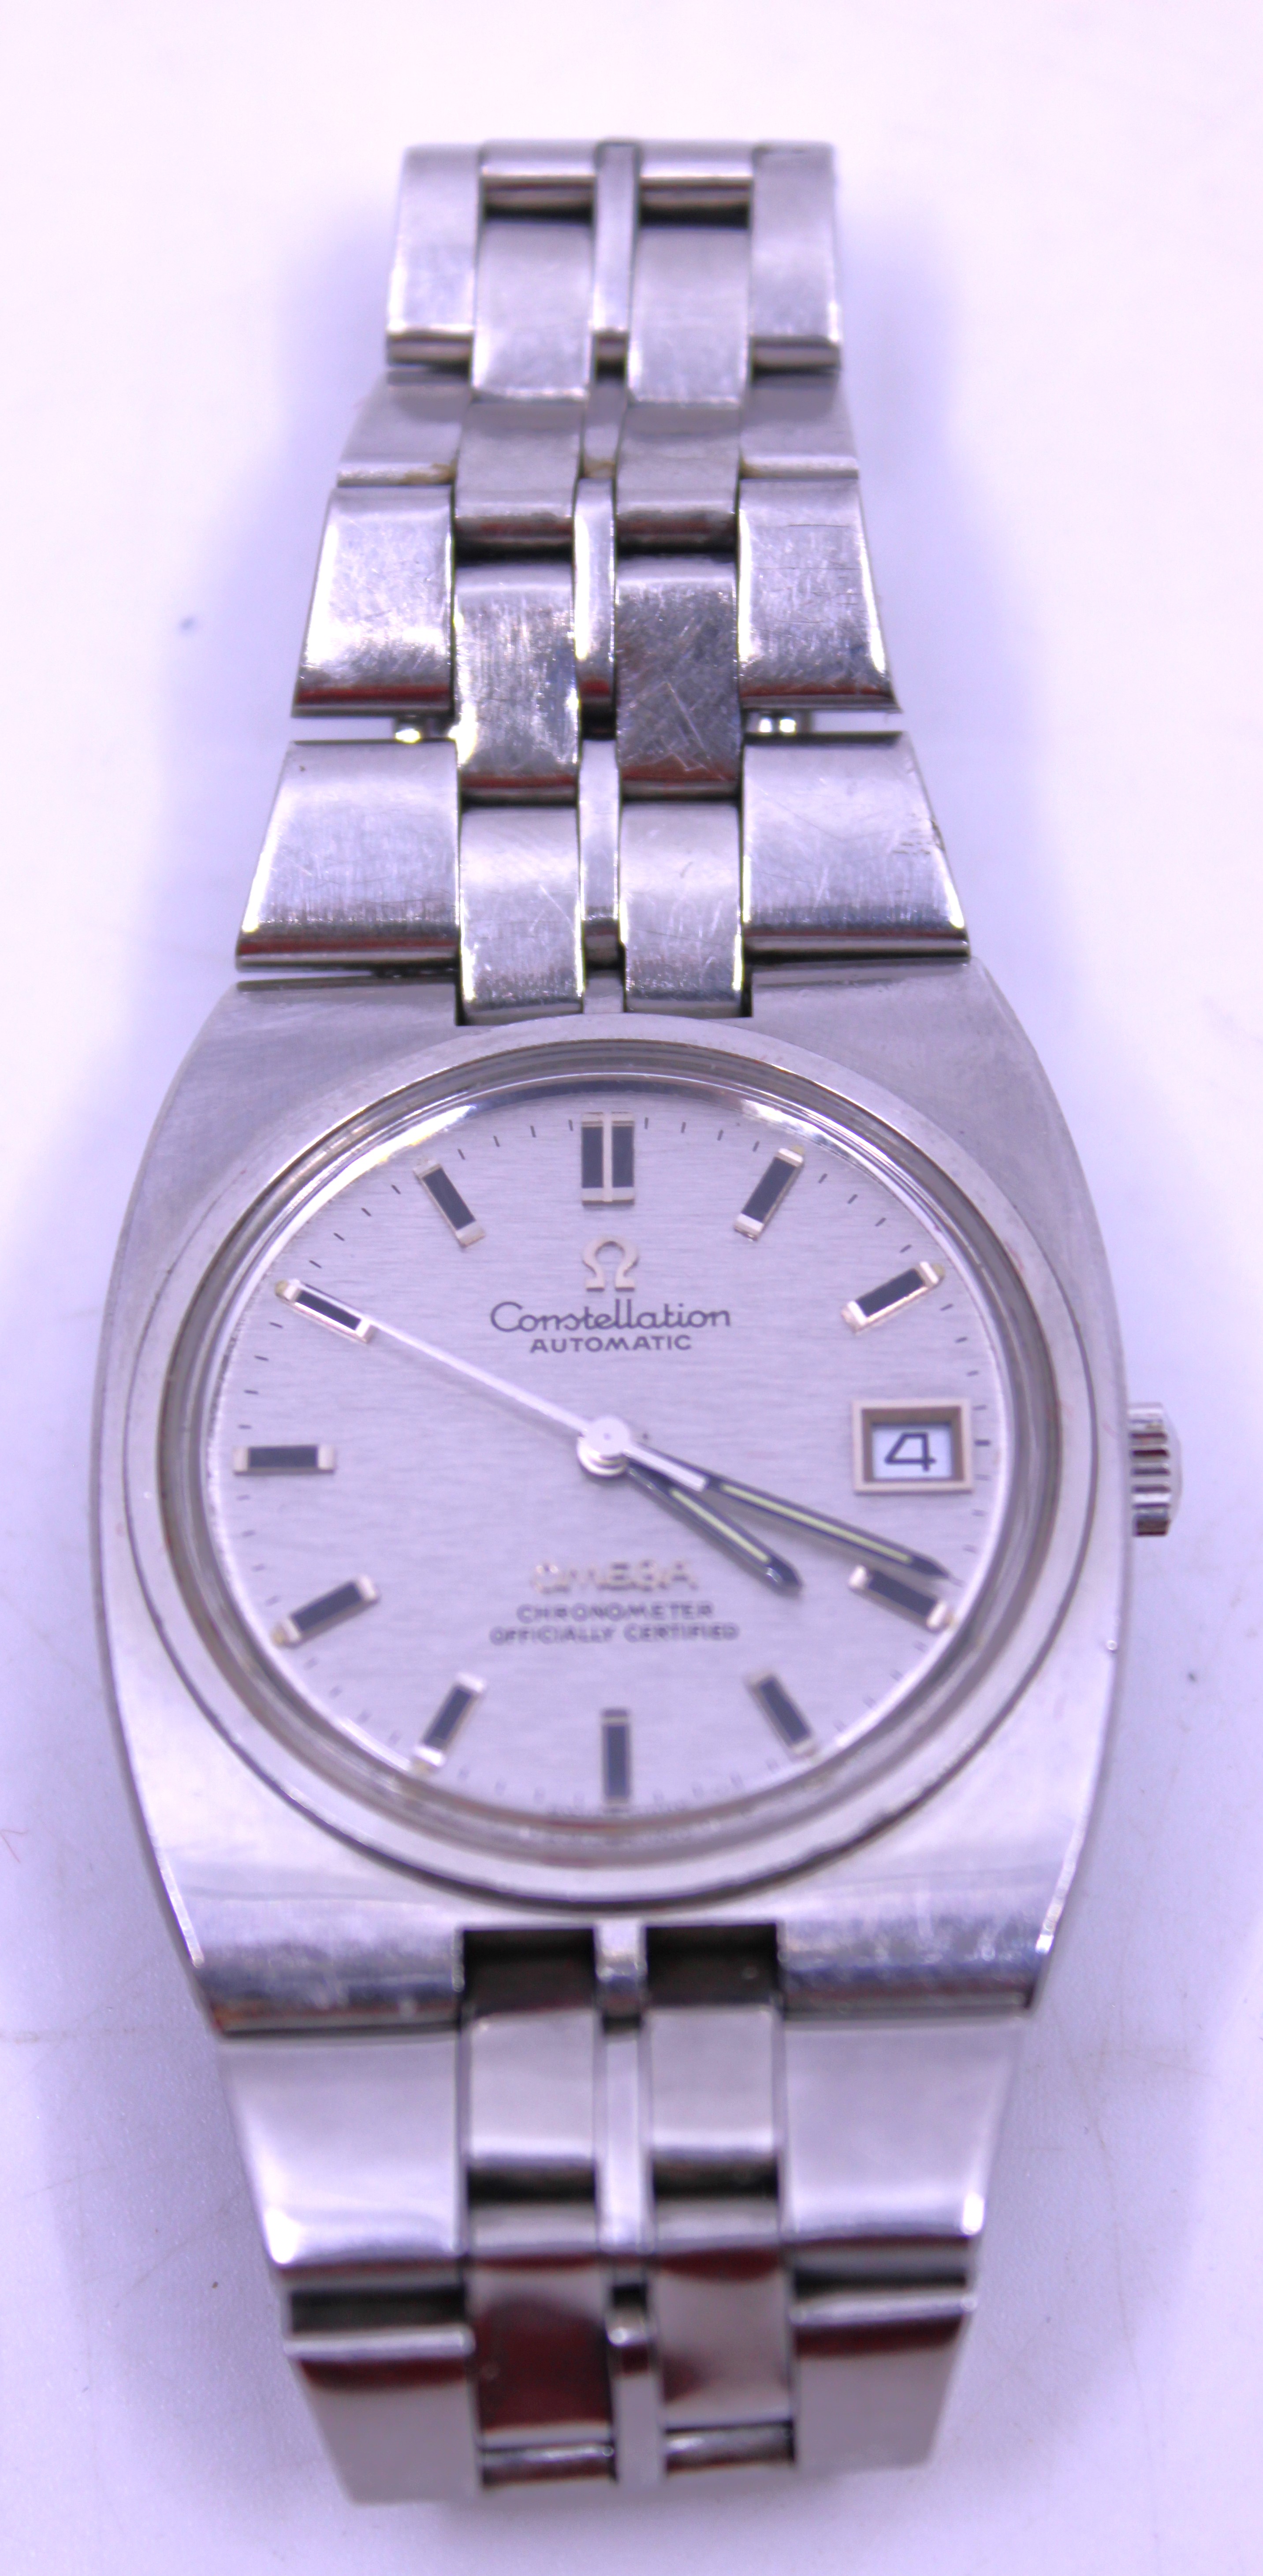 Men's Vintage 1970's? Omega Constellation Automatic Watch. Comes boxed with International Guarantee. - Image 4 of 7